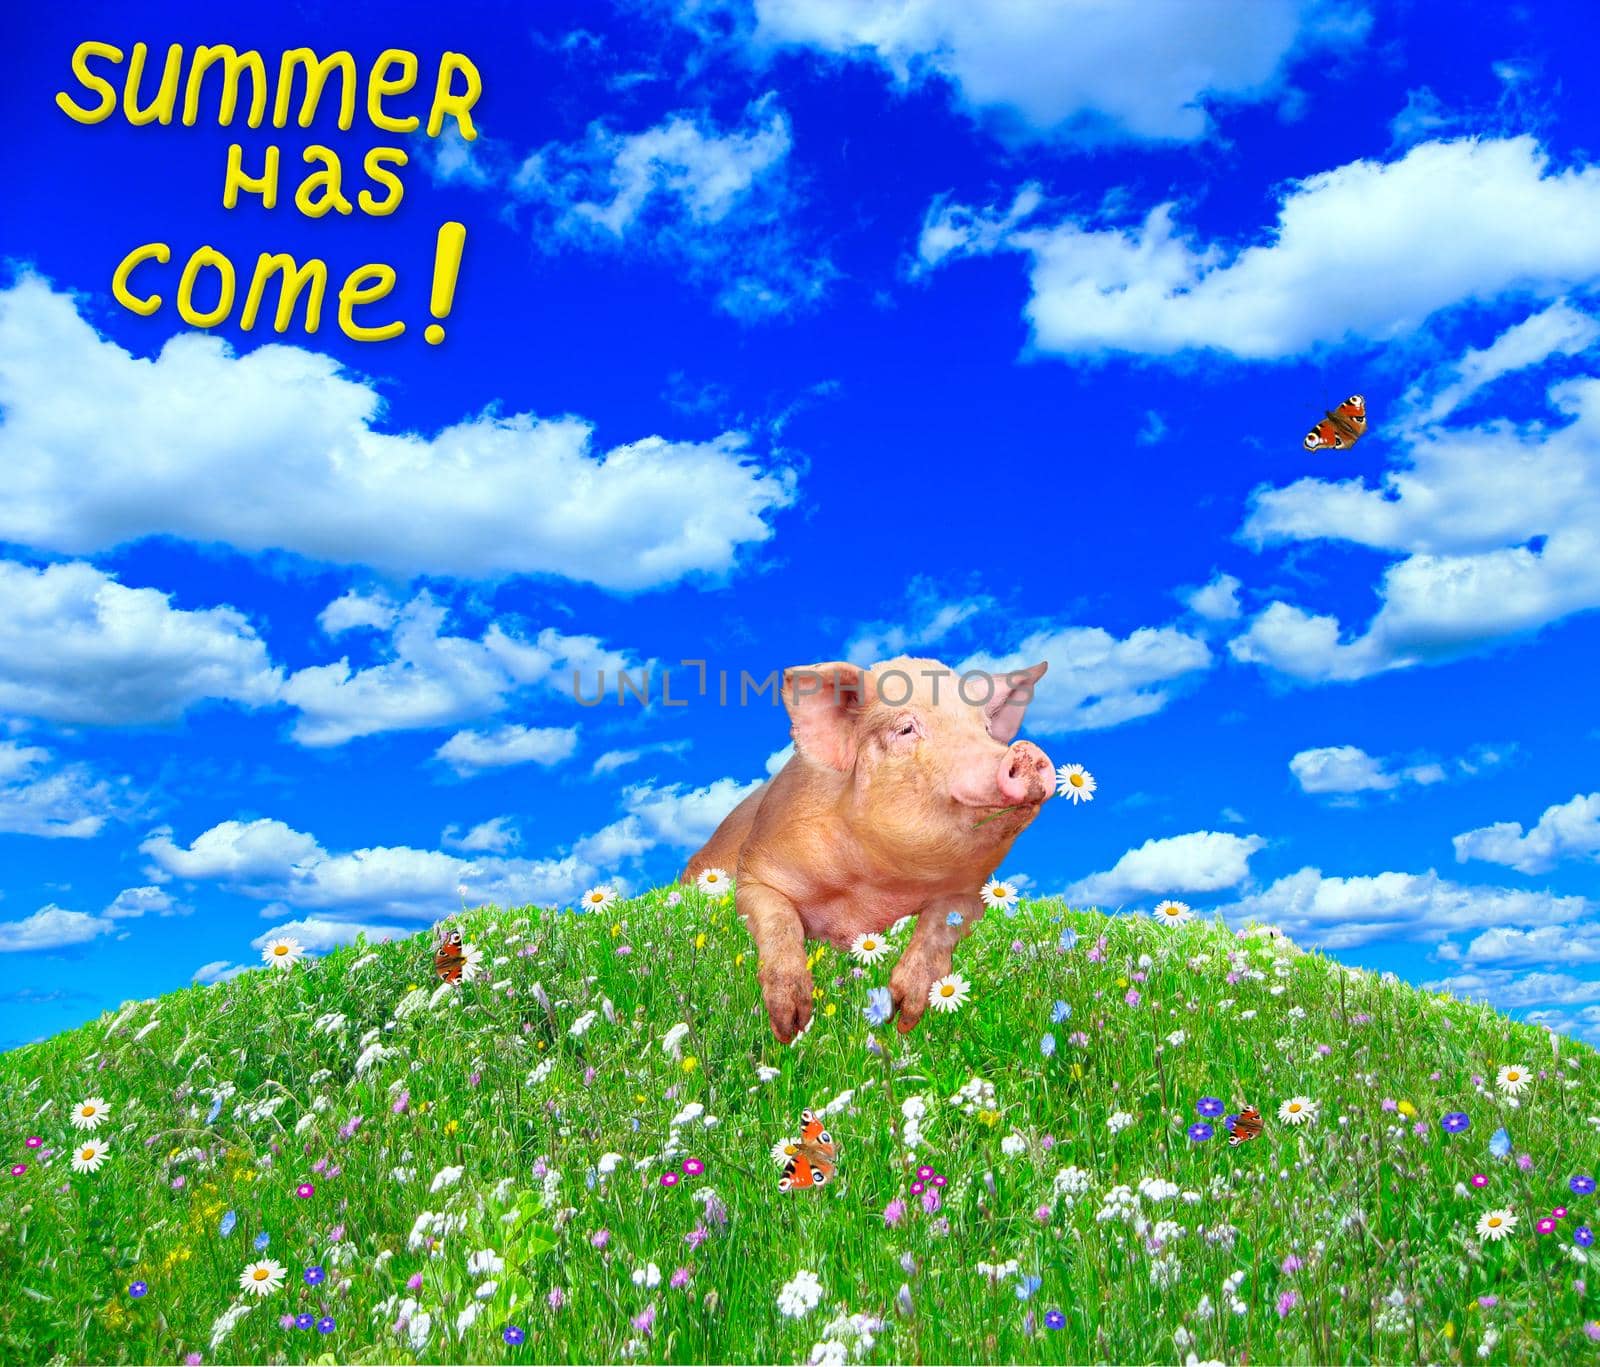 Funny pig looking out from behind hill in summer meadow. Inscription summer has come. Amusing piglet on blooming hill. Pig on beautiful glade with flowers and blue sky with clouds